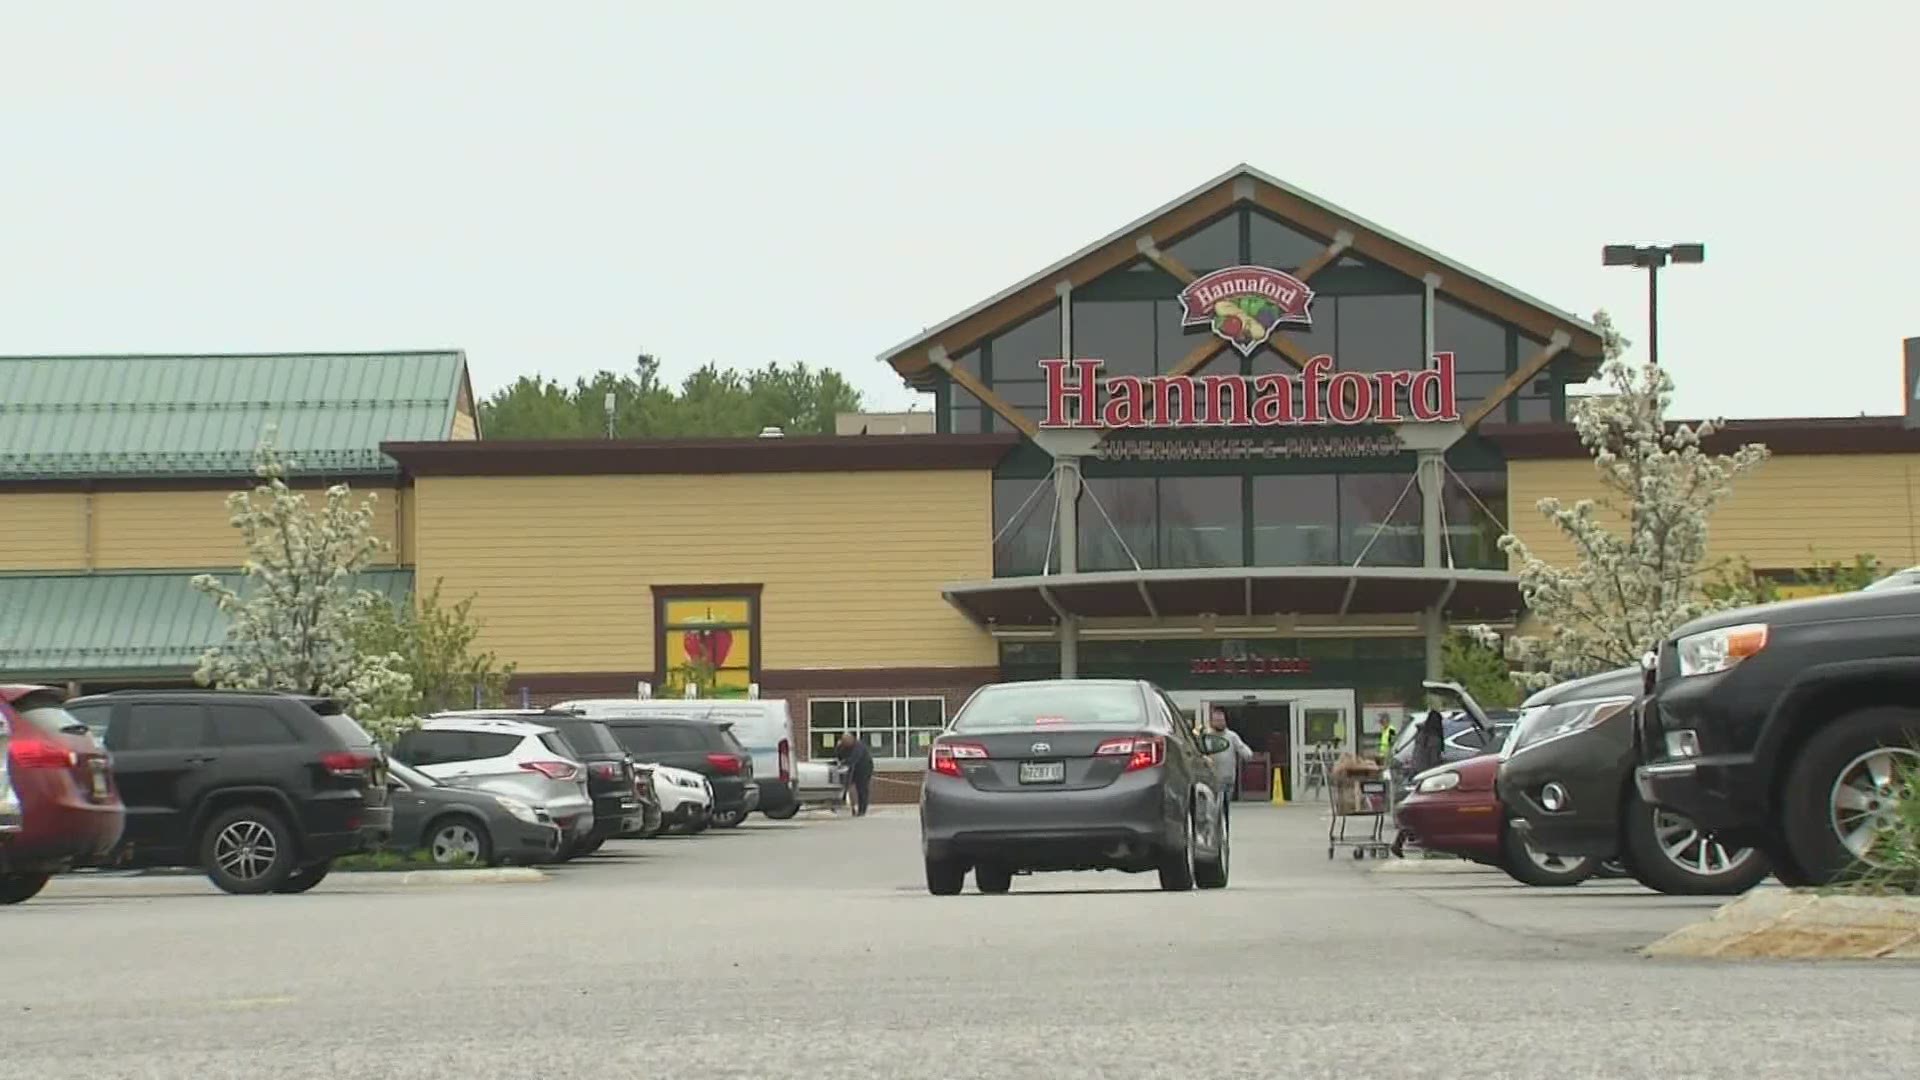 Hannaford announces plans to hire 2,000 more employees throughout New England and New York